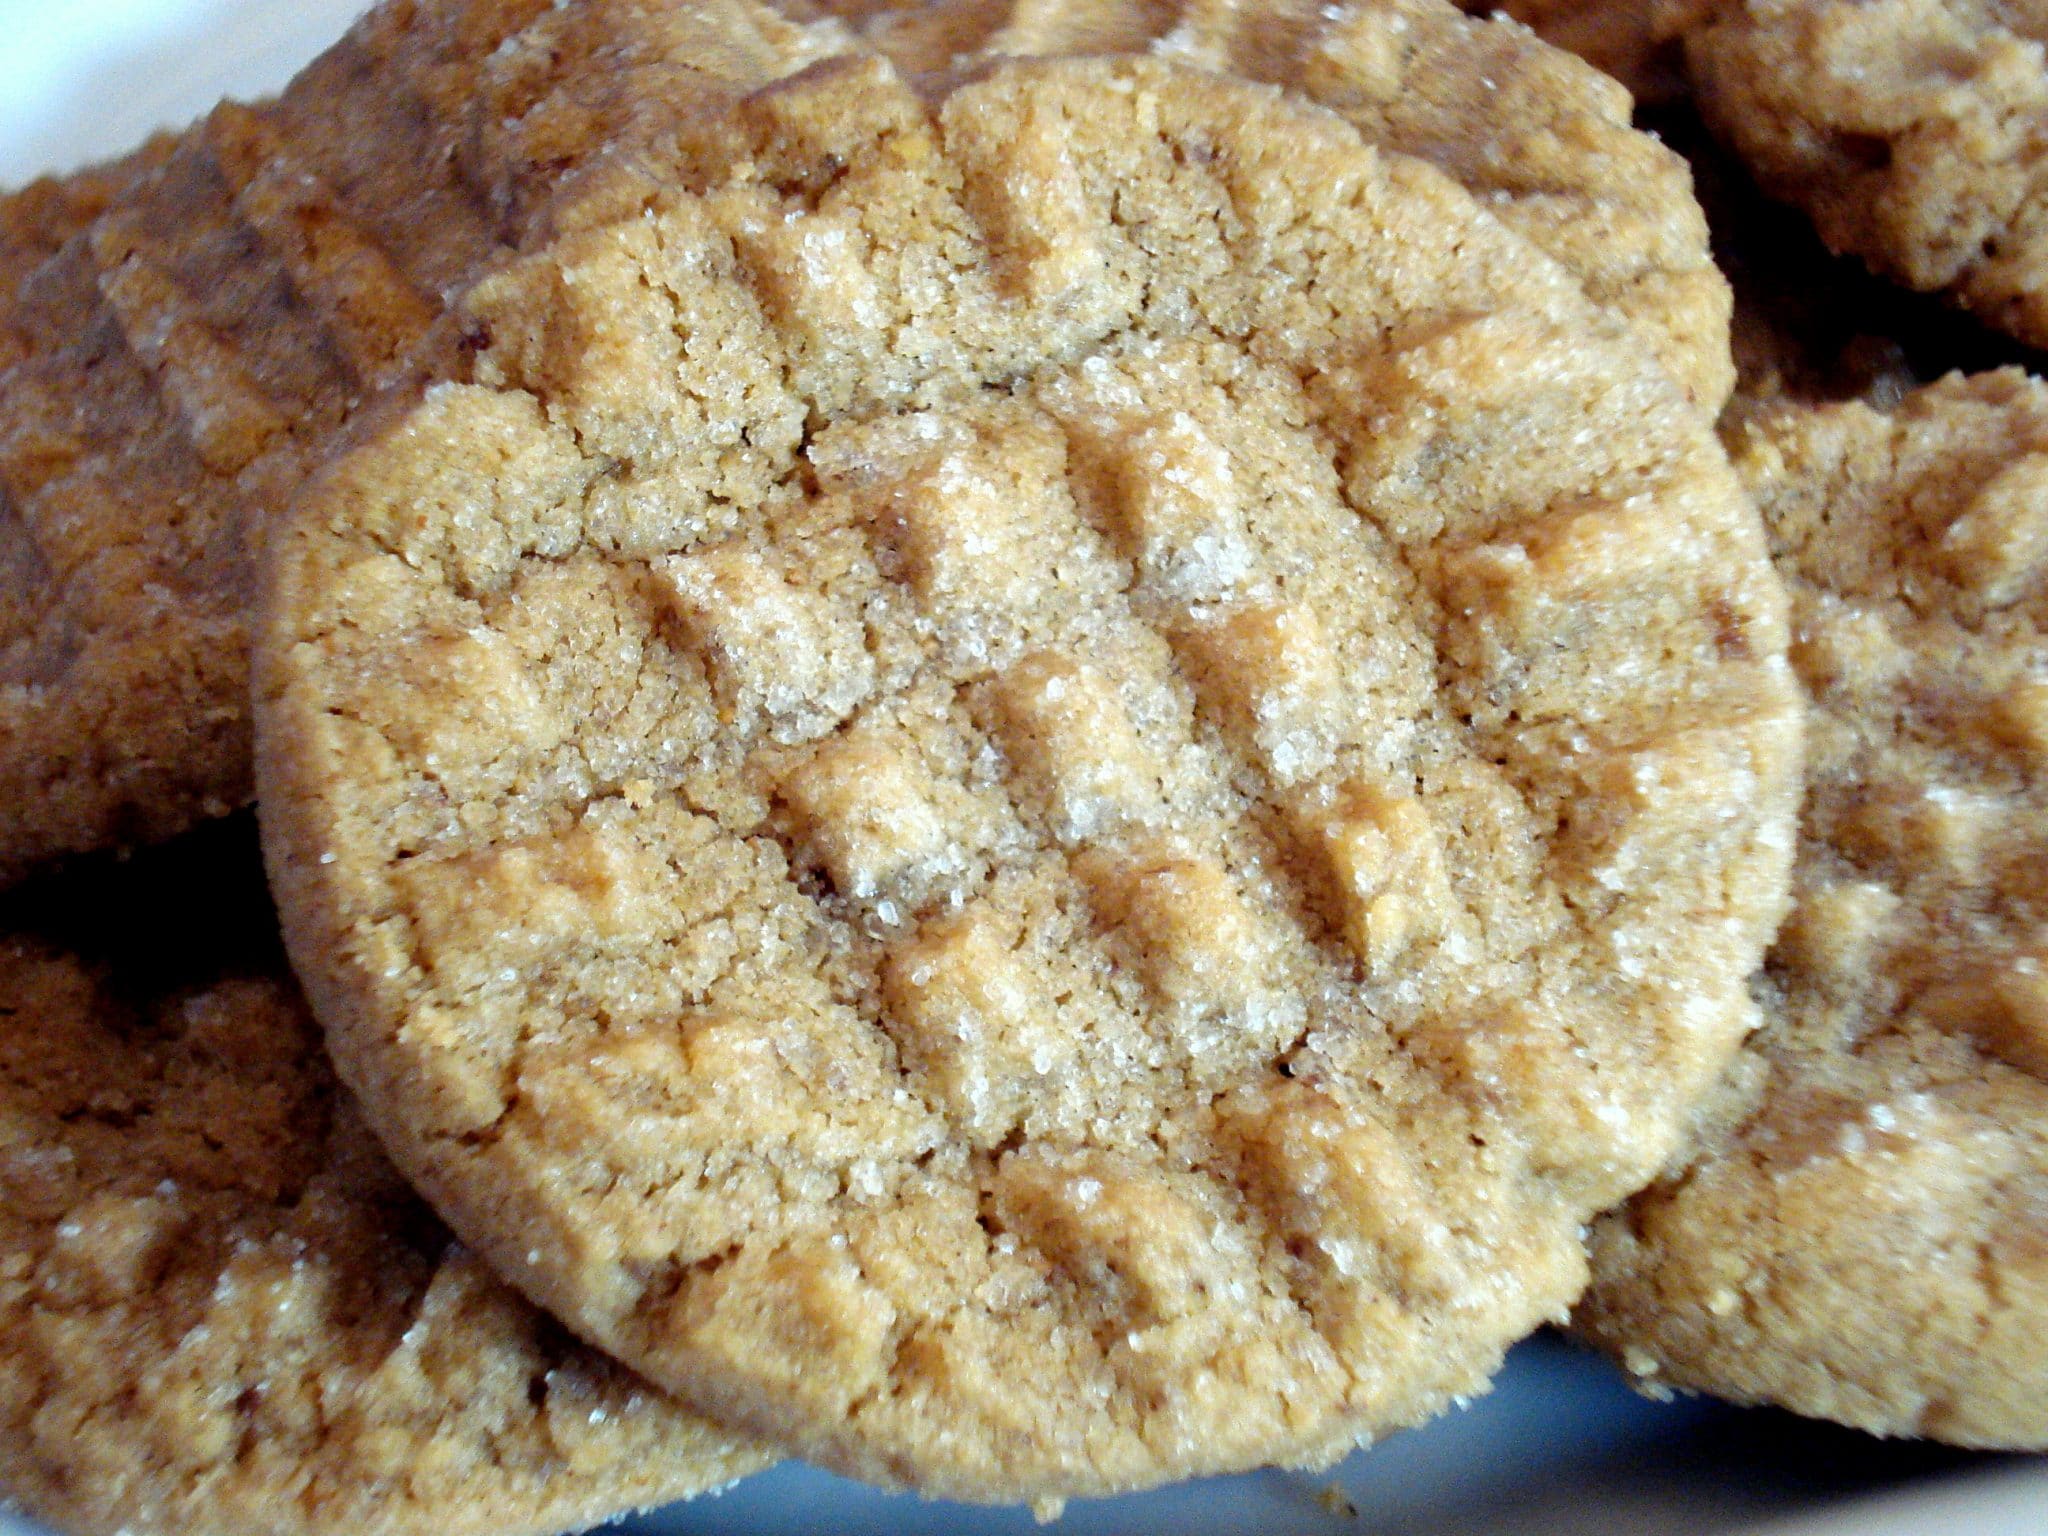 Close up of peanut butter cookies on plate